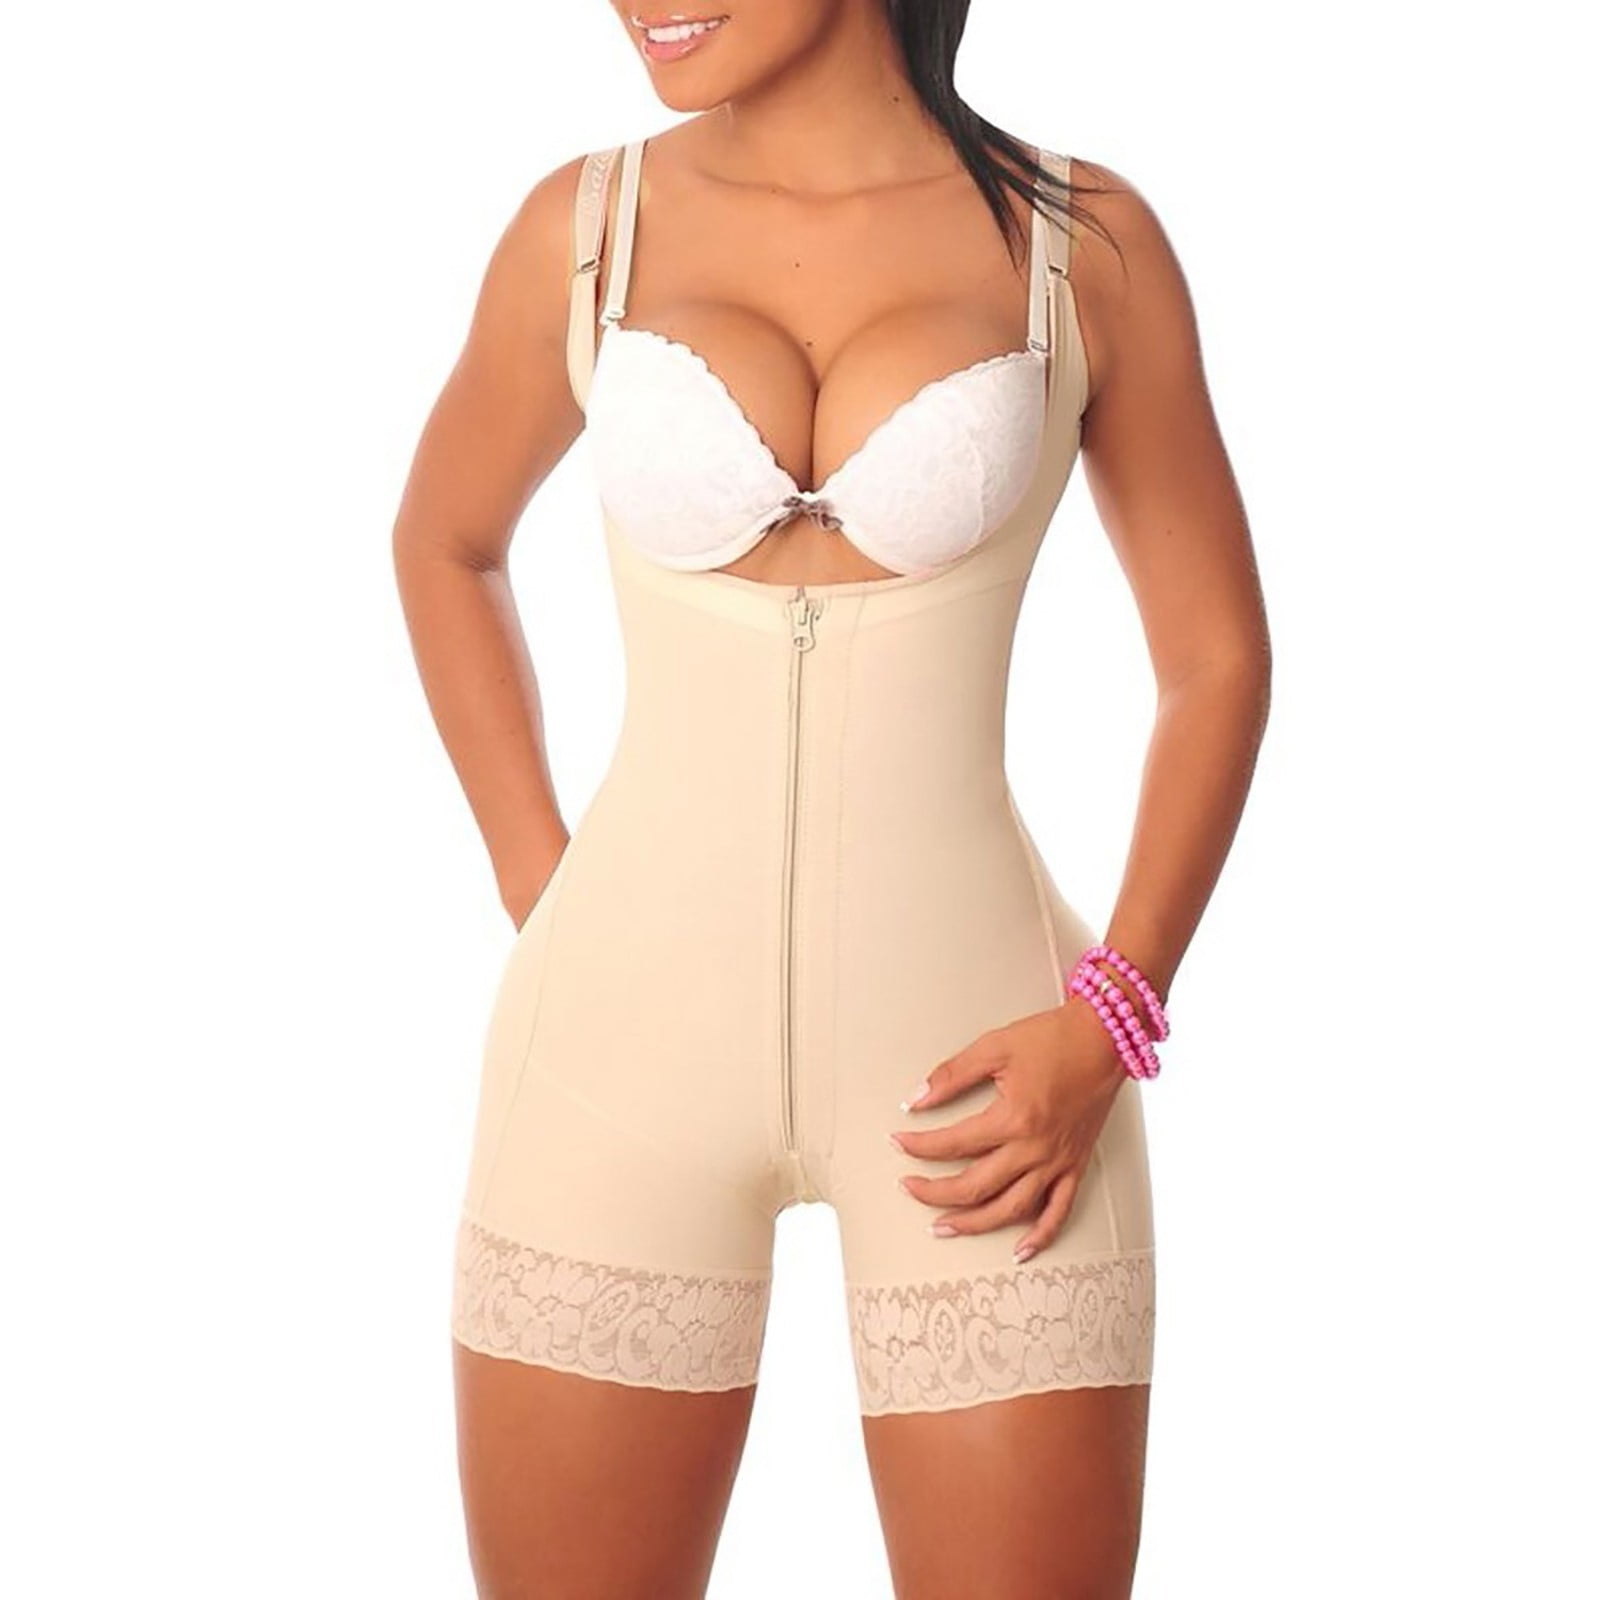 Marena Recovery Panty-Length Girdle By Marena - Aesthetica Health